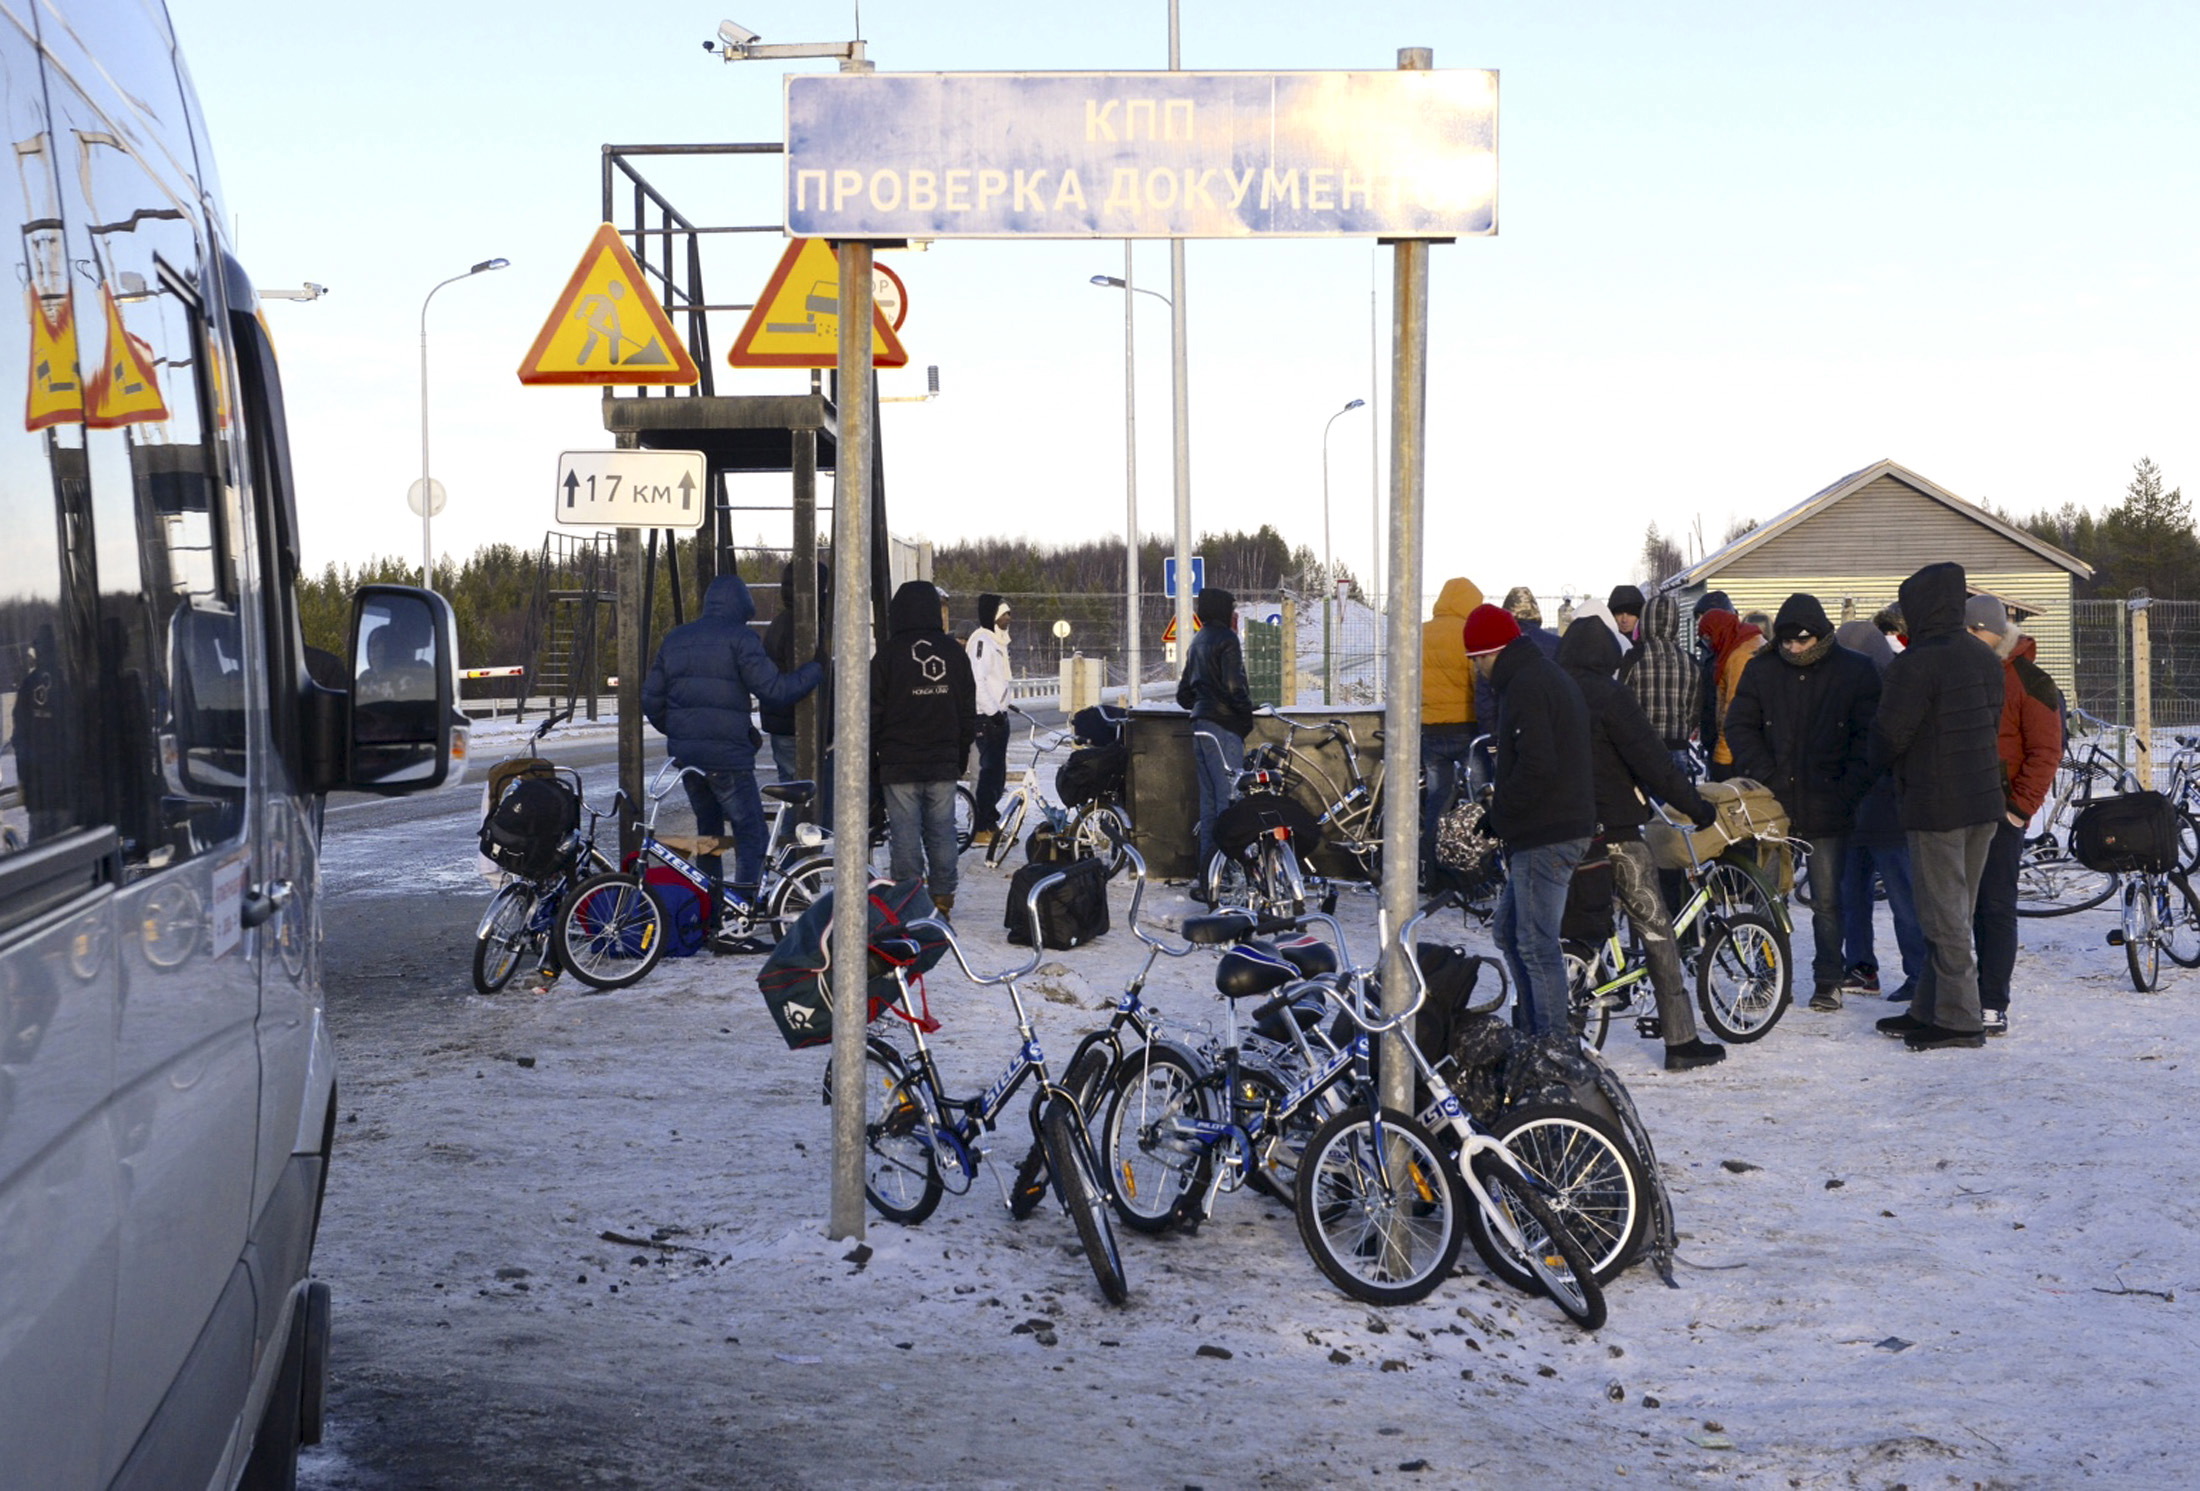 Refugees and migrants gather near a check point on the Russian-Norwegian border outside Nickel (Nikel) settlement in Murmansk region, Russia, on Oct. 30, 2015 (Stringer—Reuters)